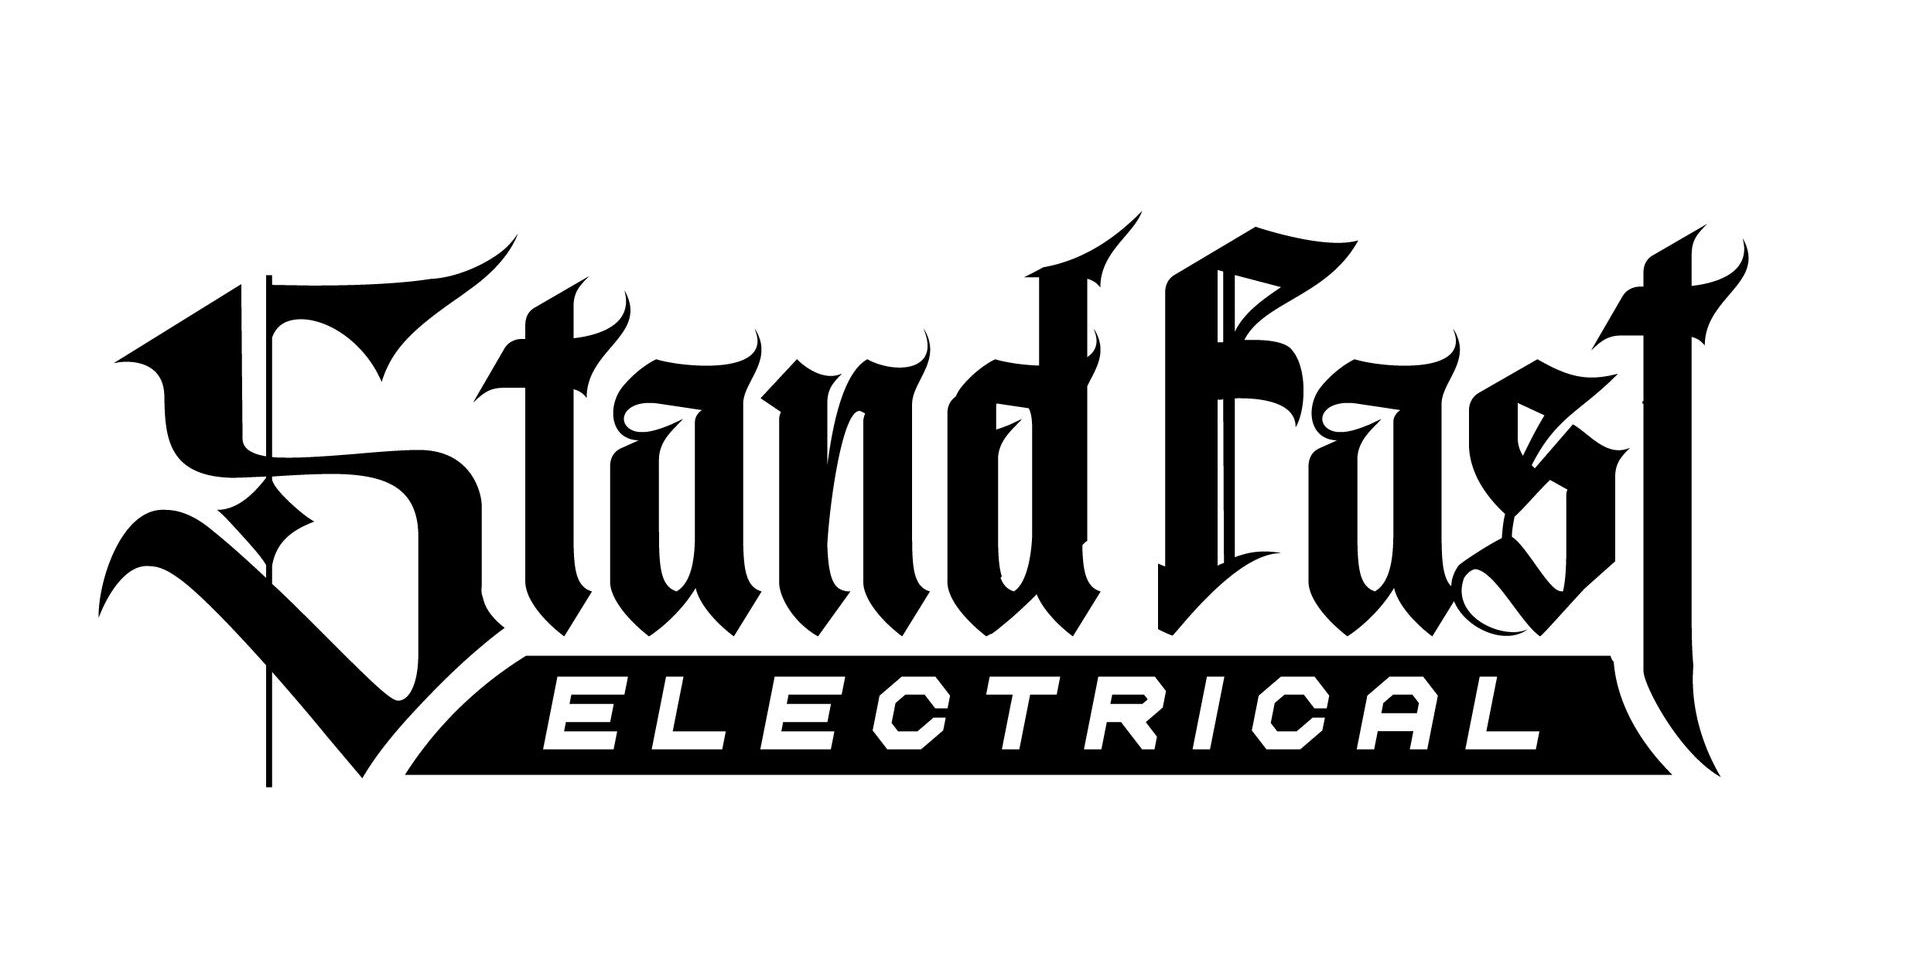 Stand Fast Electrical: Solar, Air Conditioning & Electrical in Warwick